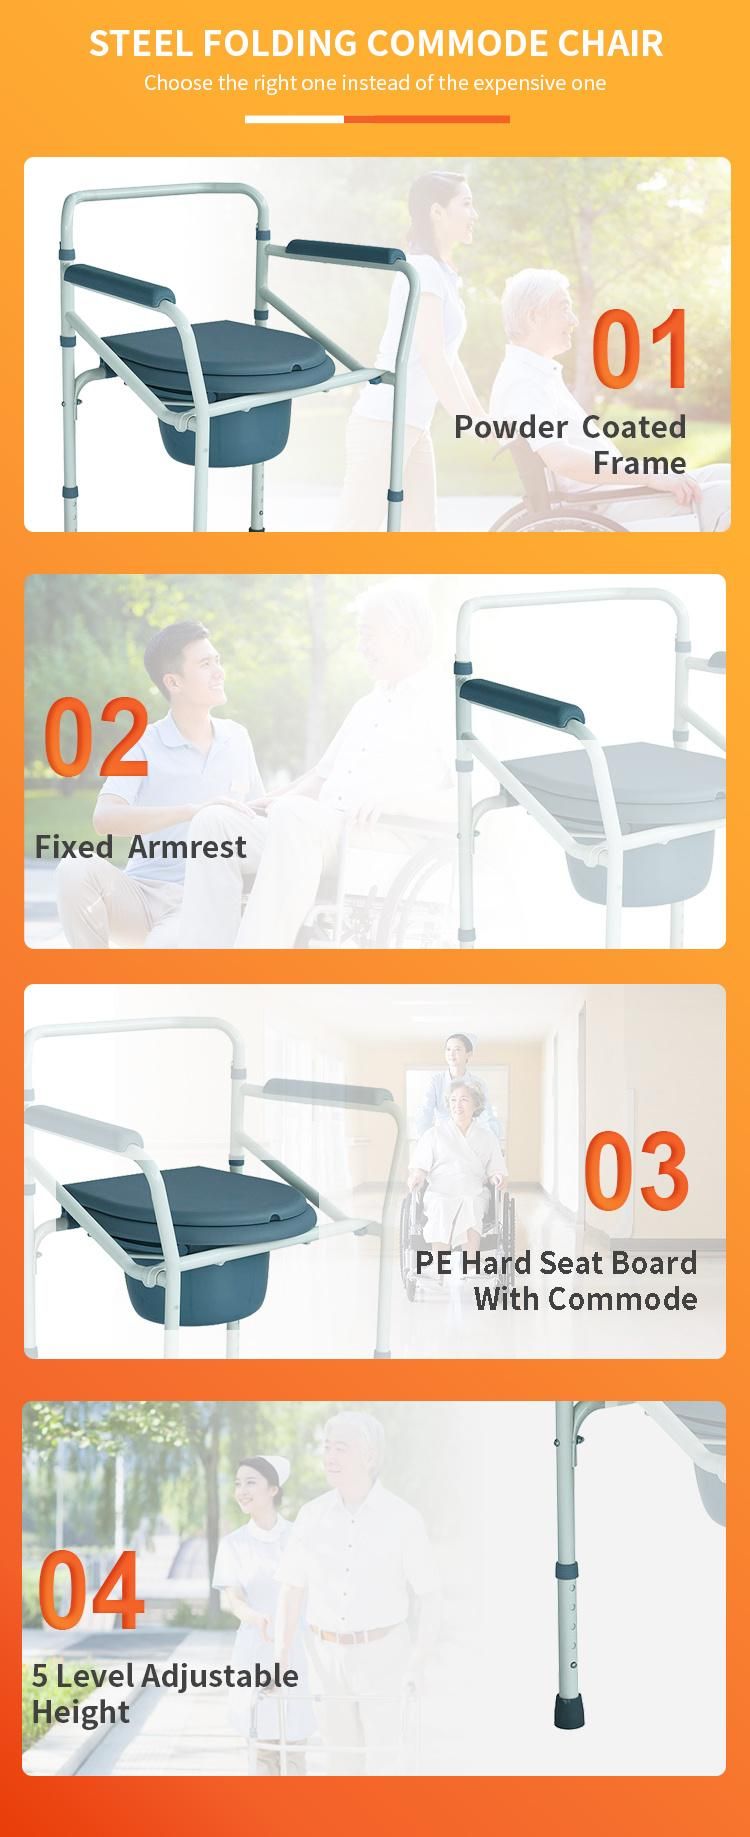 Print Basic Cheapest High Quality of Foshan Steel Chair for Elderly People Folding Toilet Chair with Bucket Steel Commode Chair